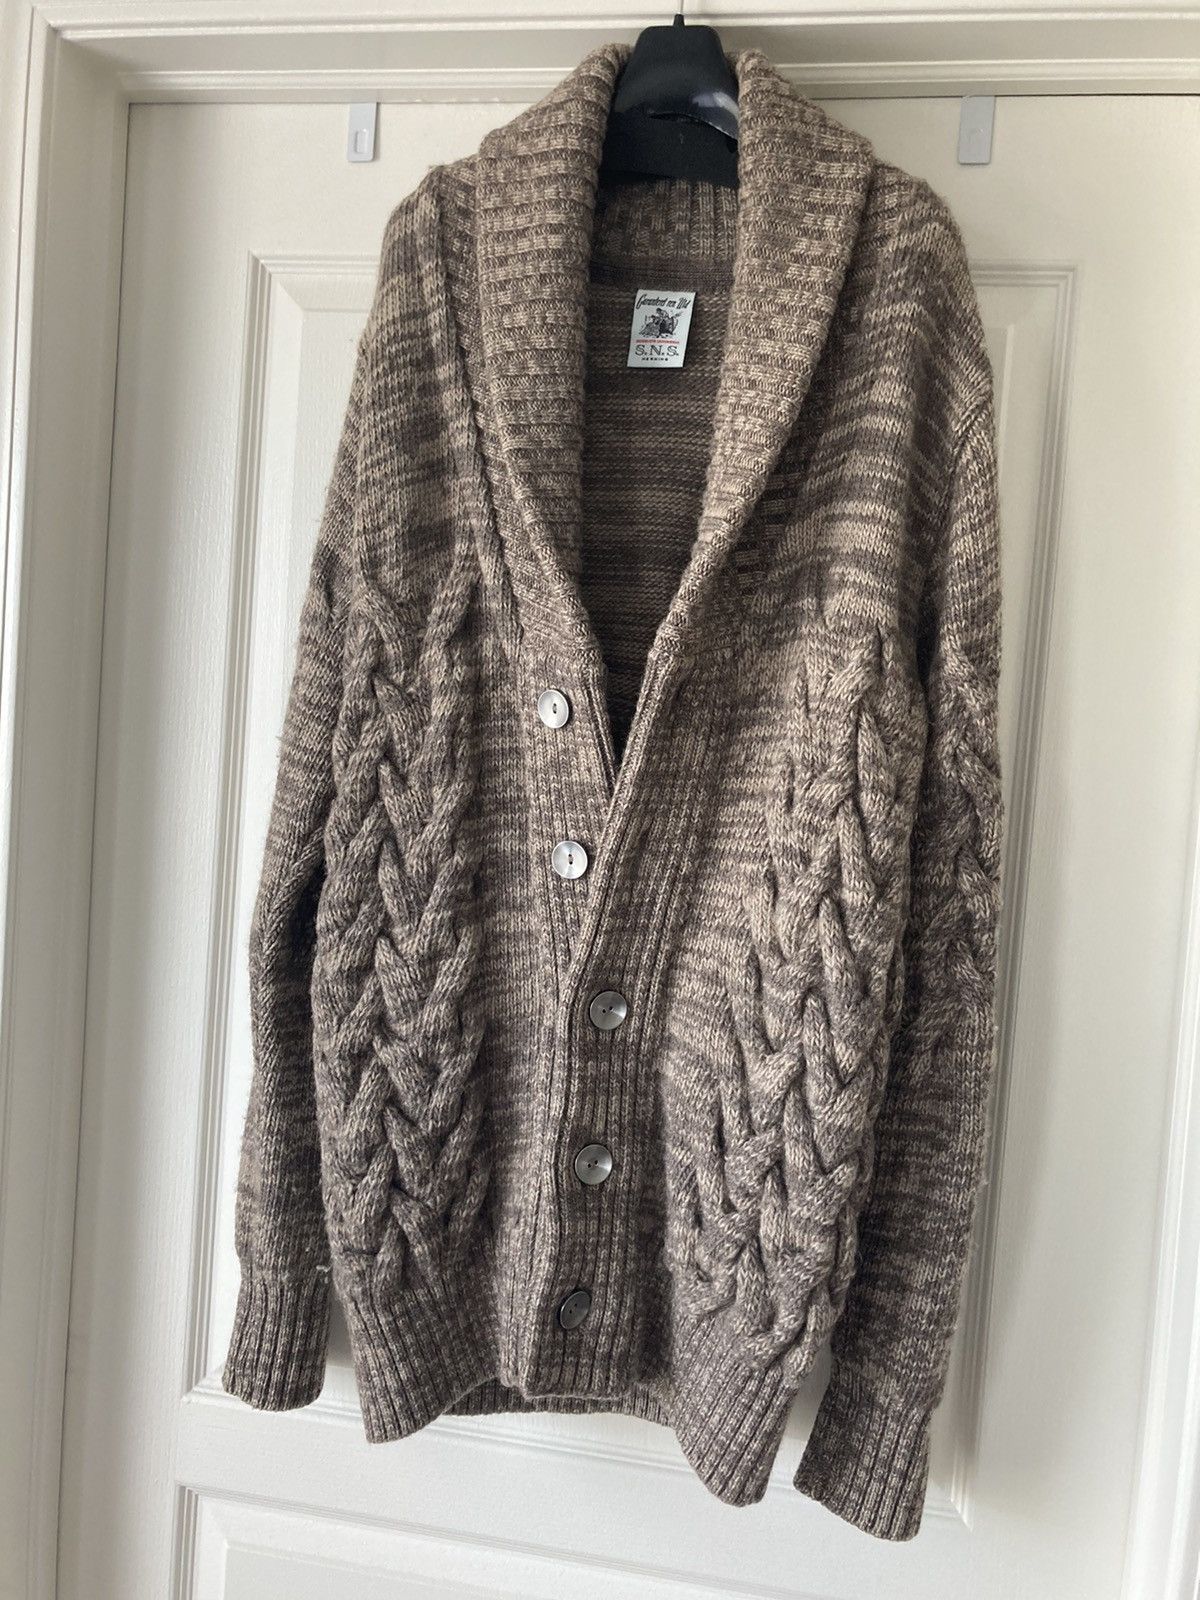 S.N.S. Herning Long cardigan cable knit Size US S / EU 44-46 / 1 - 4 Thumbnail